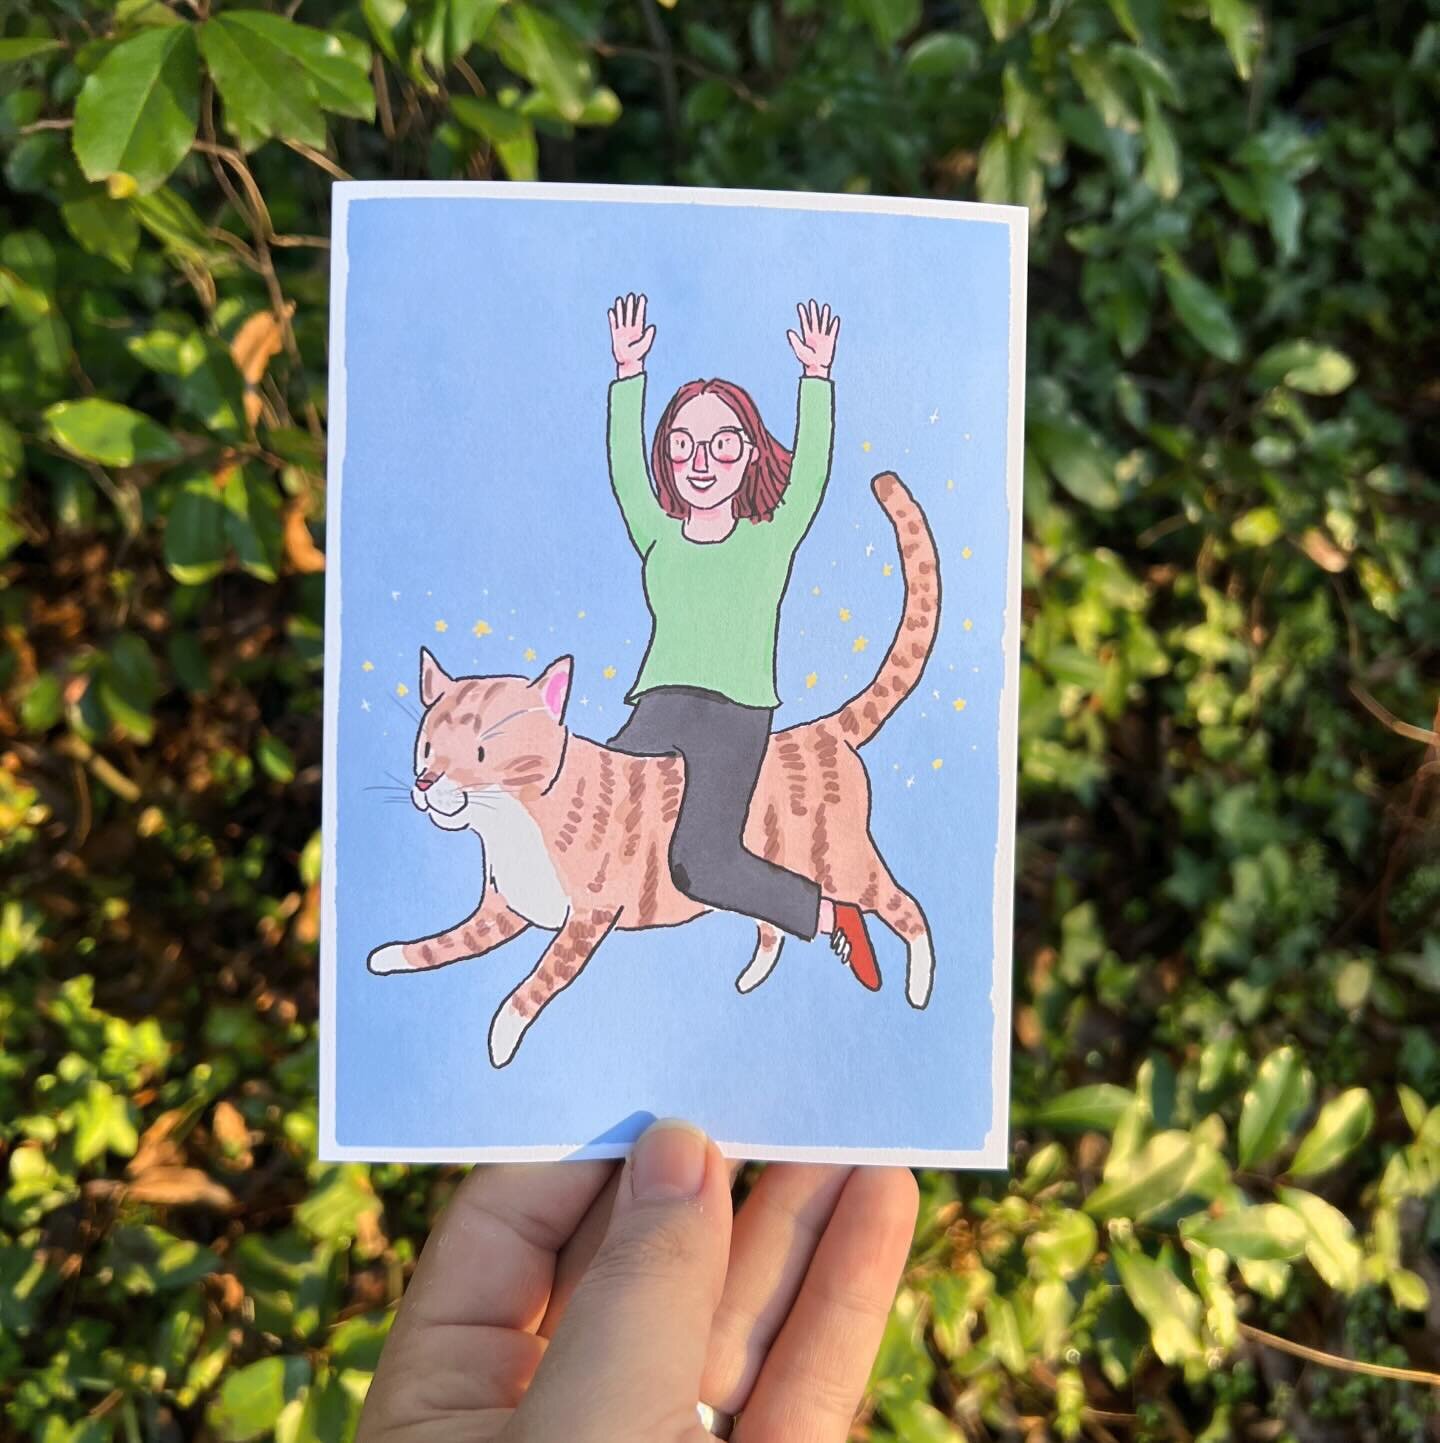 Best way to celebrate a friend&rsquo;s birthday? Illustrating a portrait of them riding a giant cat flying. @katiescarboroughart ✨🐈✨
.
#redriverpaper #catportrait #commission #birthdaygiftideas #illustration #flyingcat